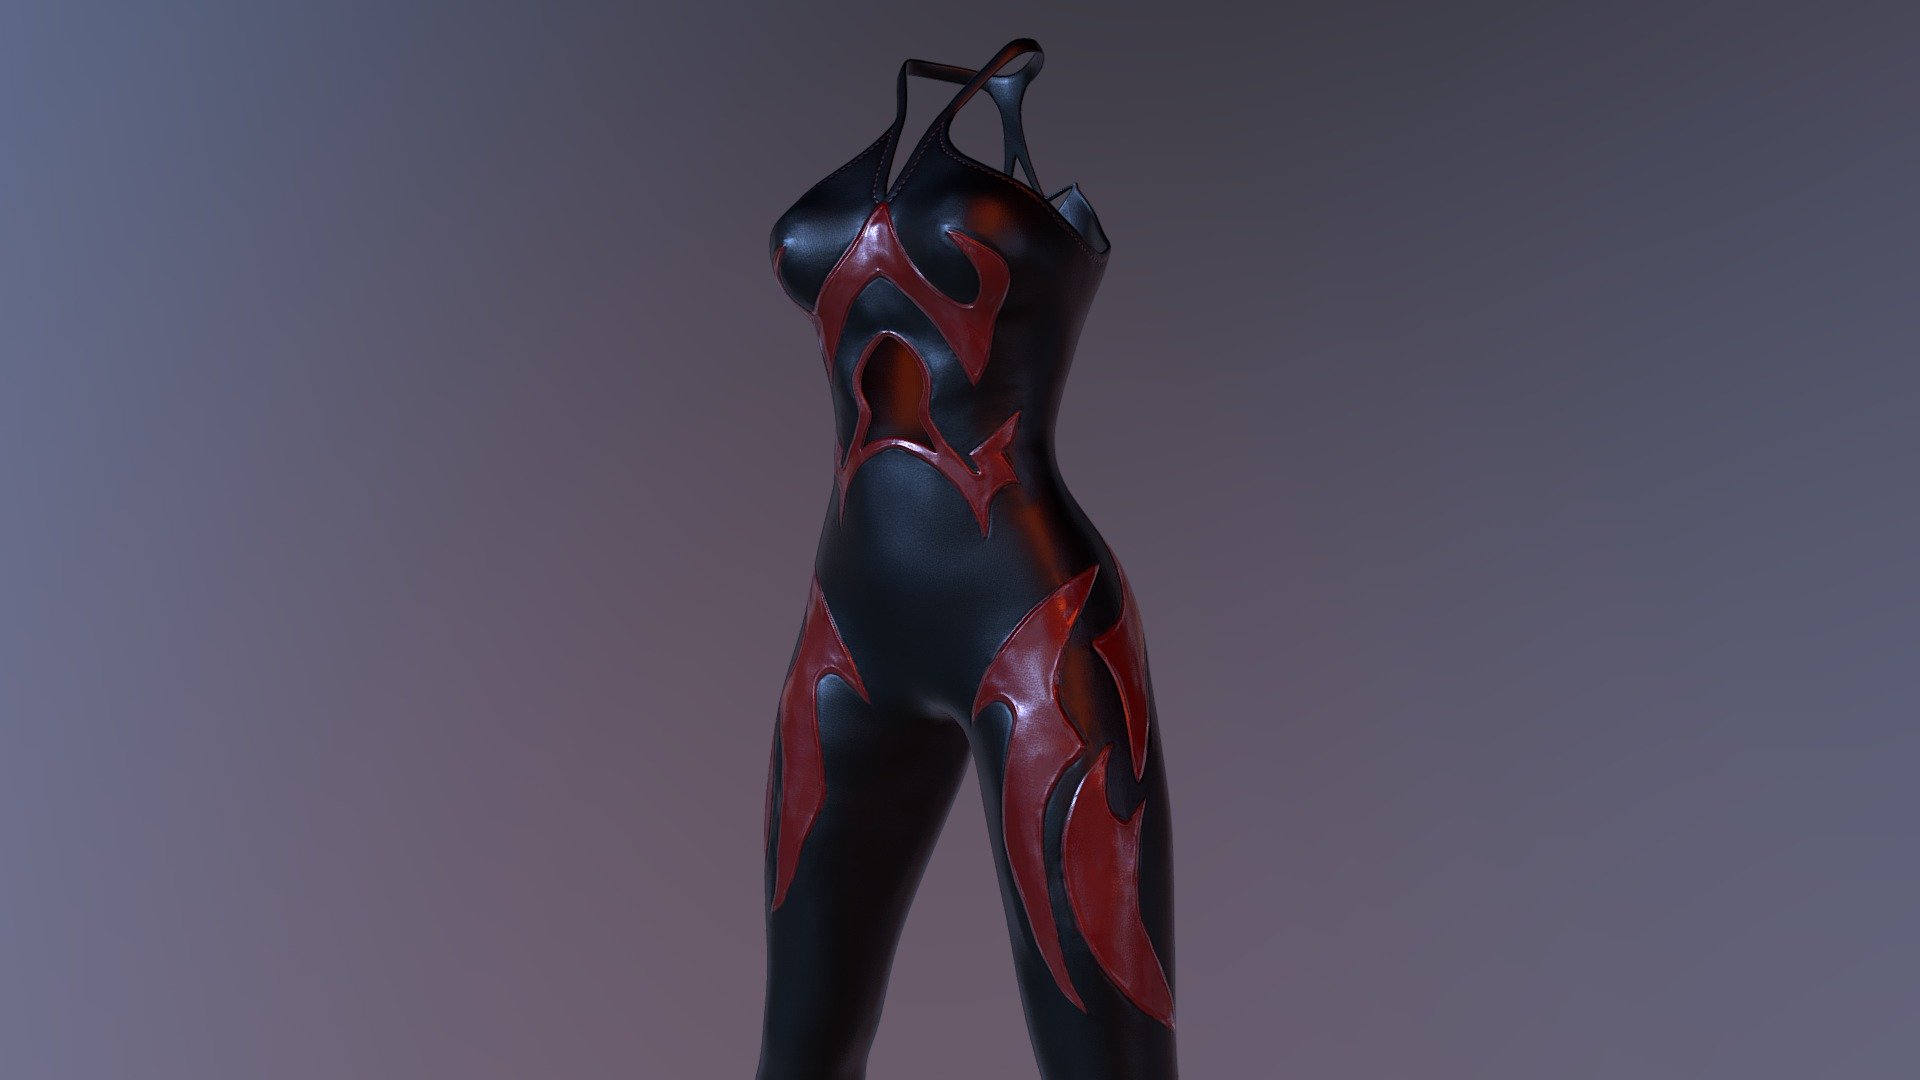 The Banshee Bodysuit

I made that bodysuit in Blender and Substance Painter. 

Details like stickers was hand scuplted and baked to normal map, stitched drawed in Substance 3d model